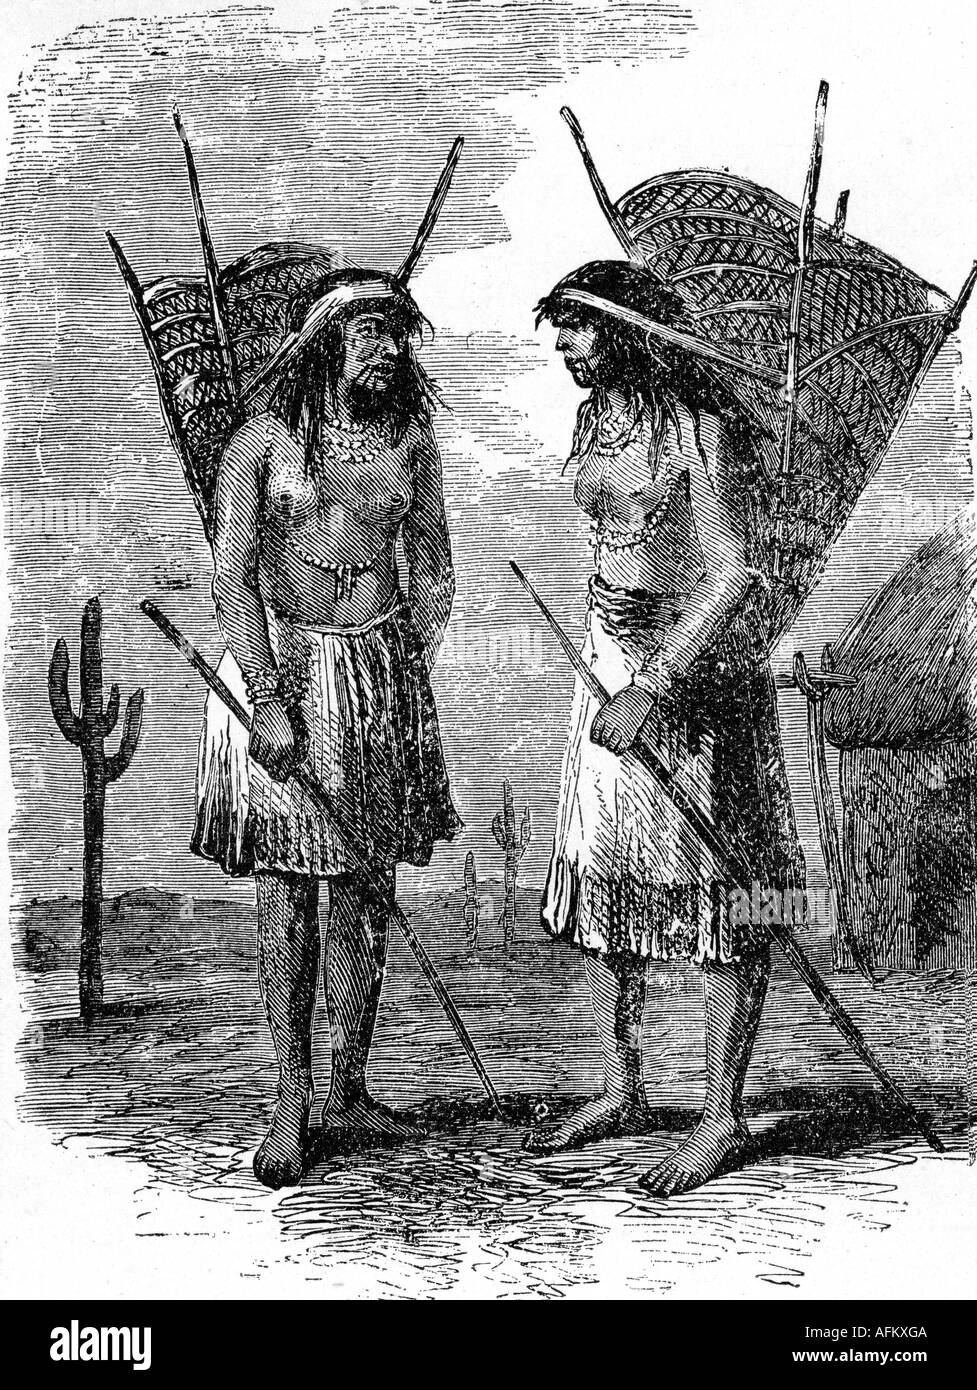 geography/travel, USA, people, Native Americans, tribes, Pomo, two women, engraving, 19th century, American Indians, North America, California, historic, historical, Stock Photo